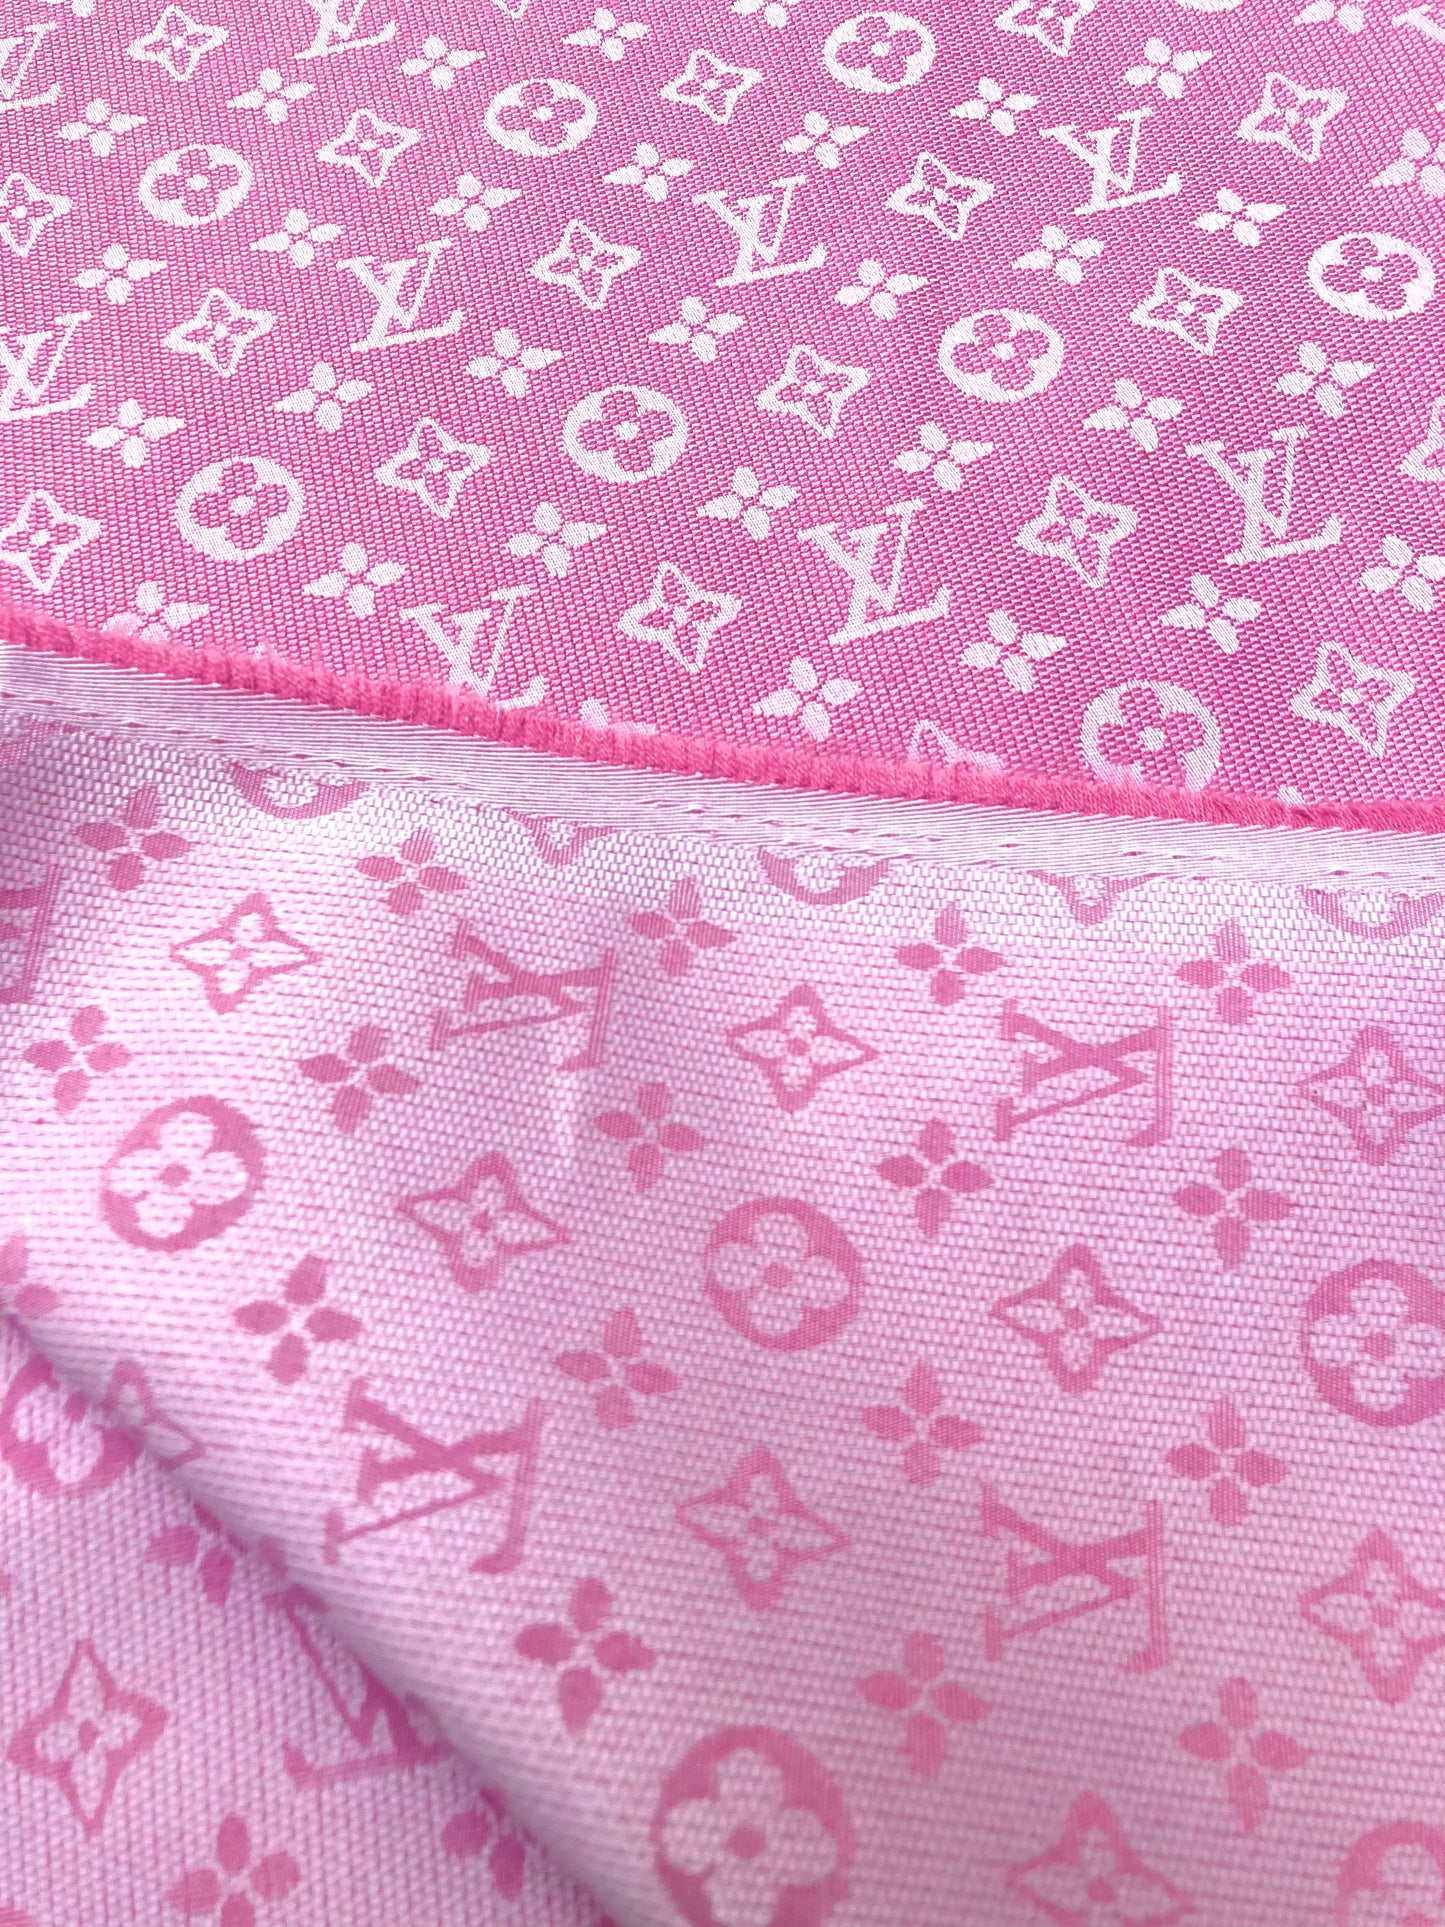 Barbie Pink LV Inspired Fabric for Handmade DIY Projects